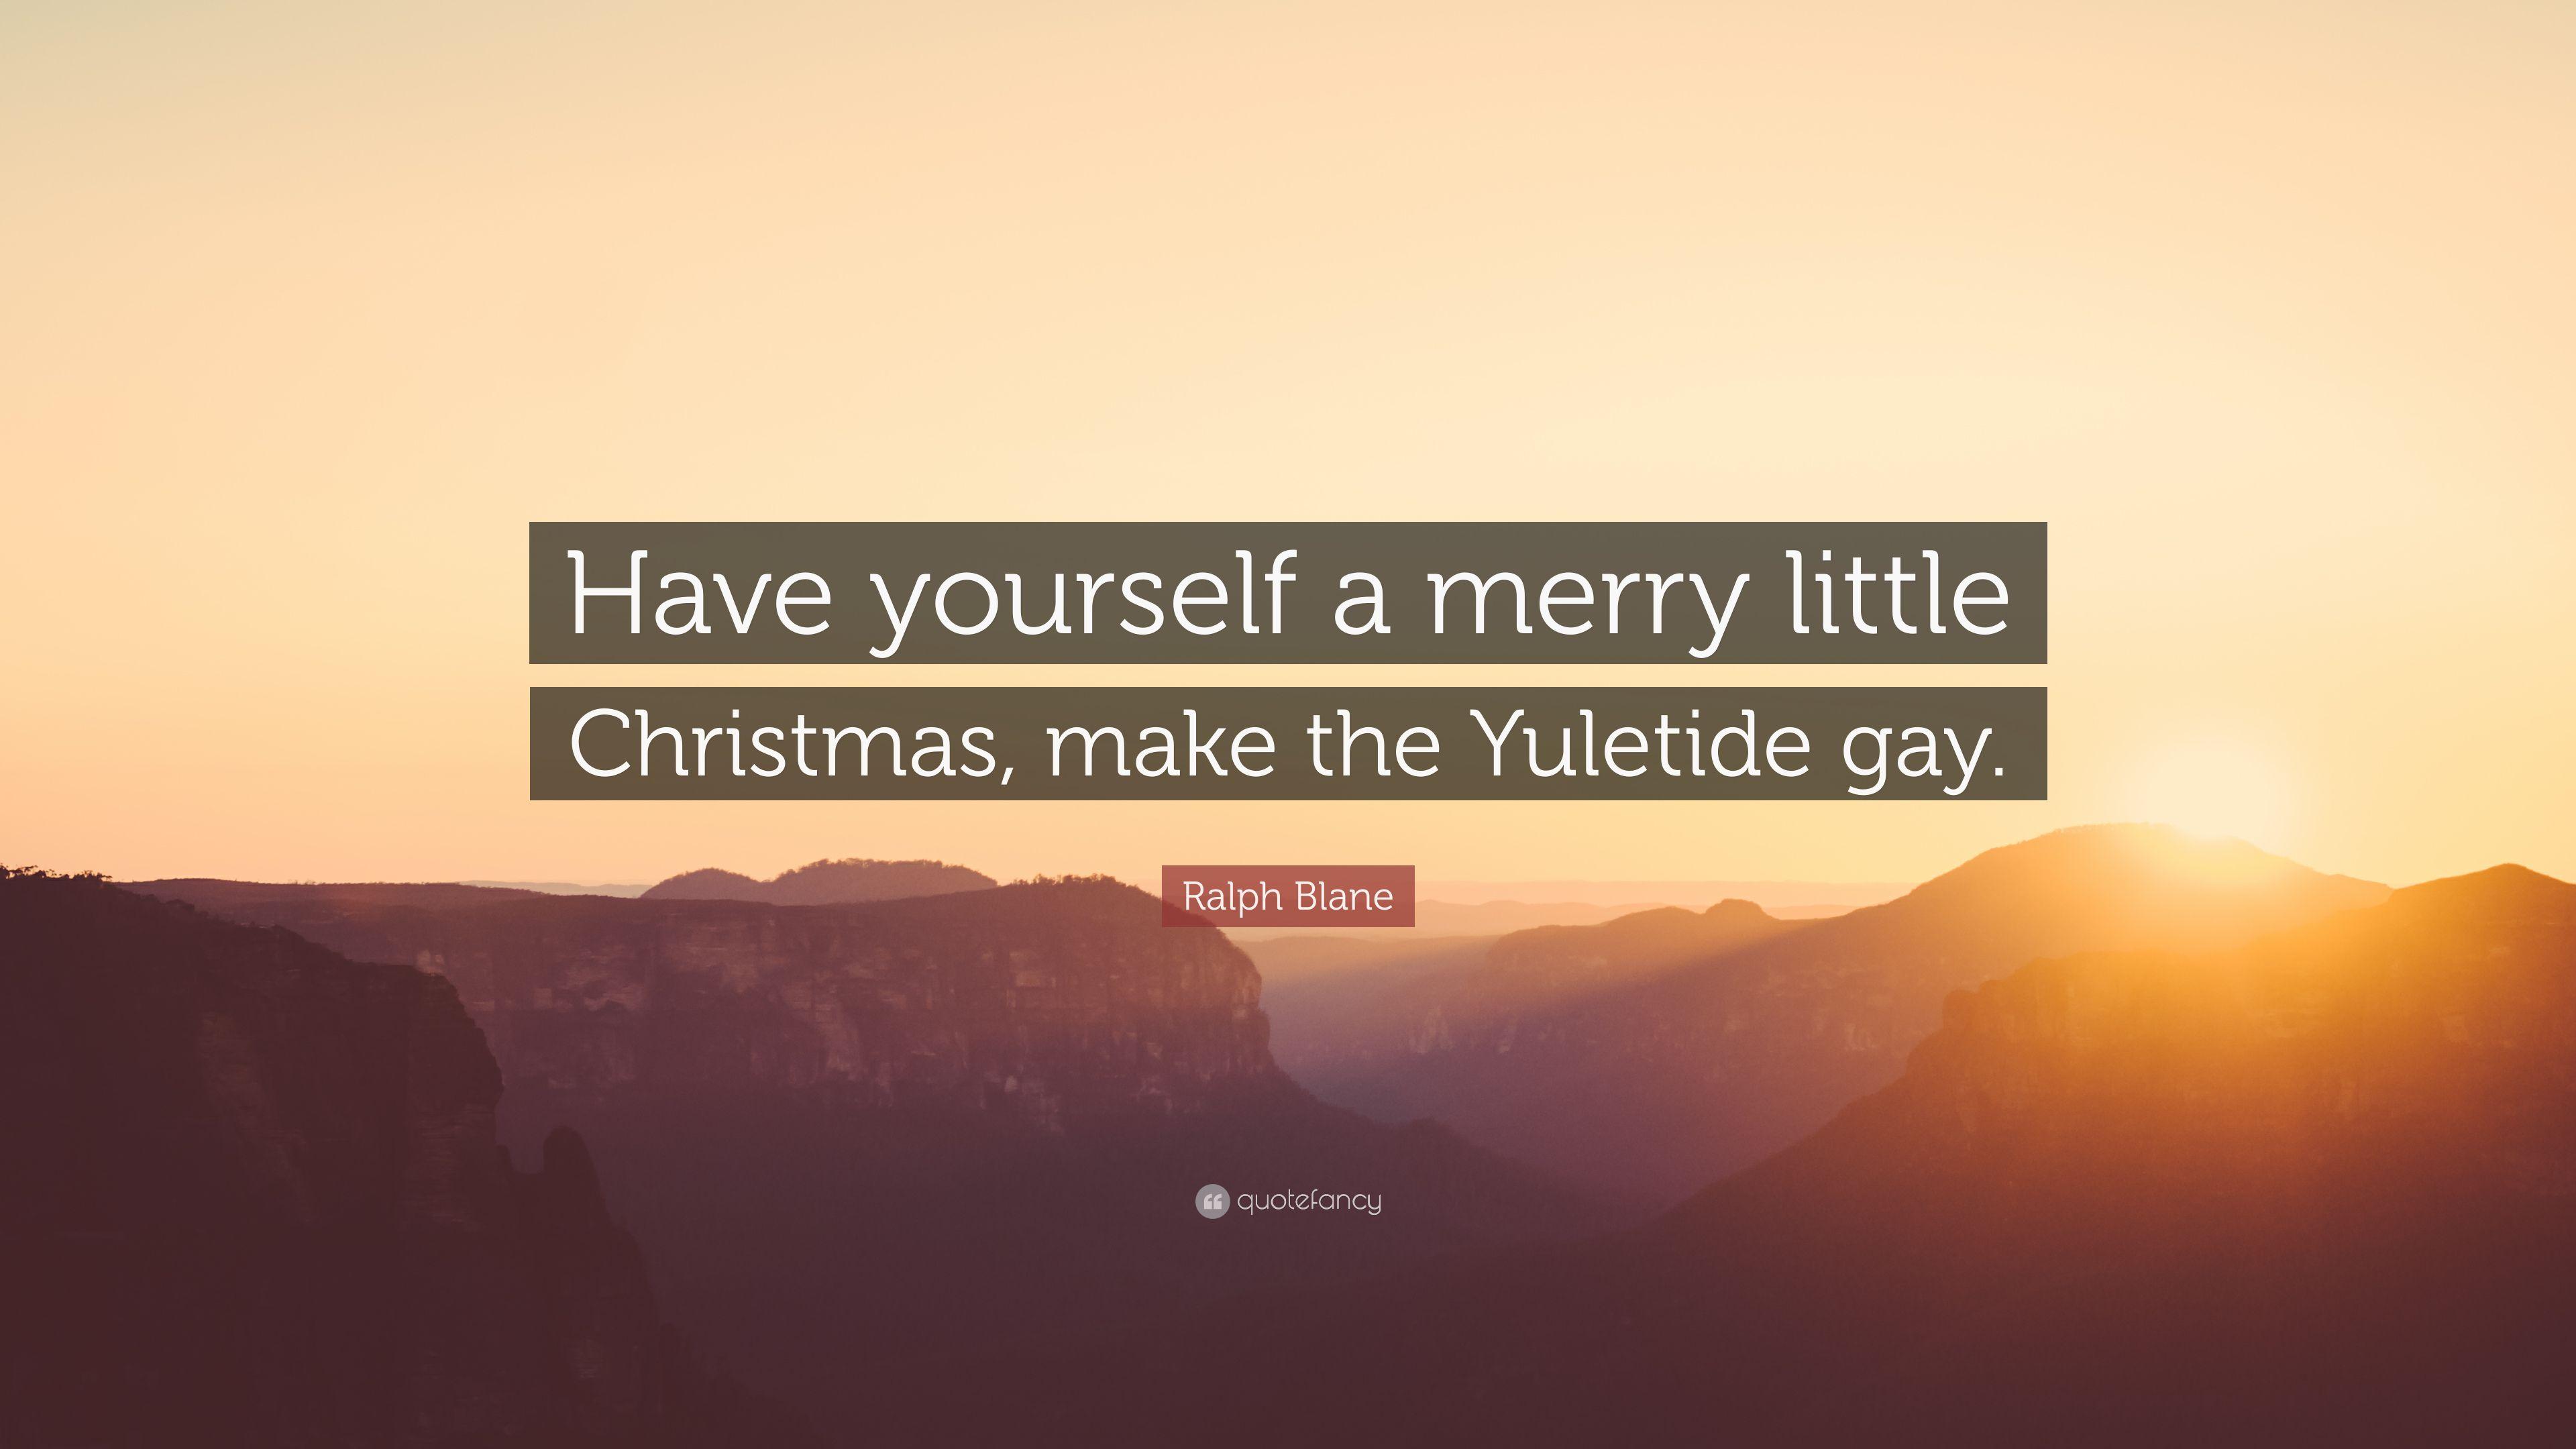 Ralph Blane Quote: “Have yourself a merry little Christmas, make